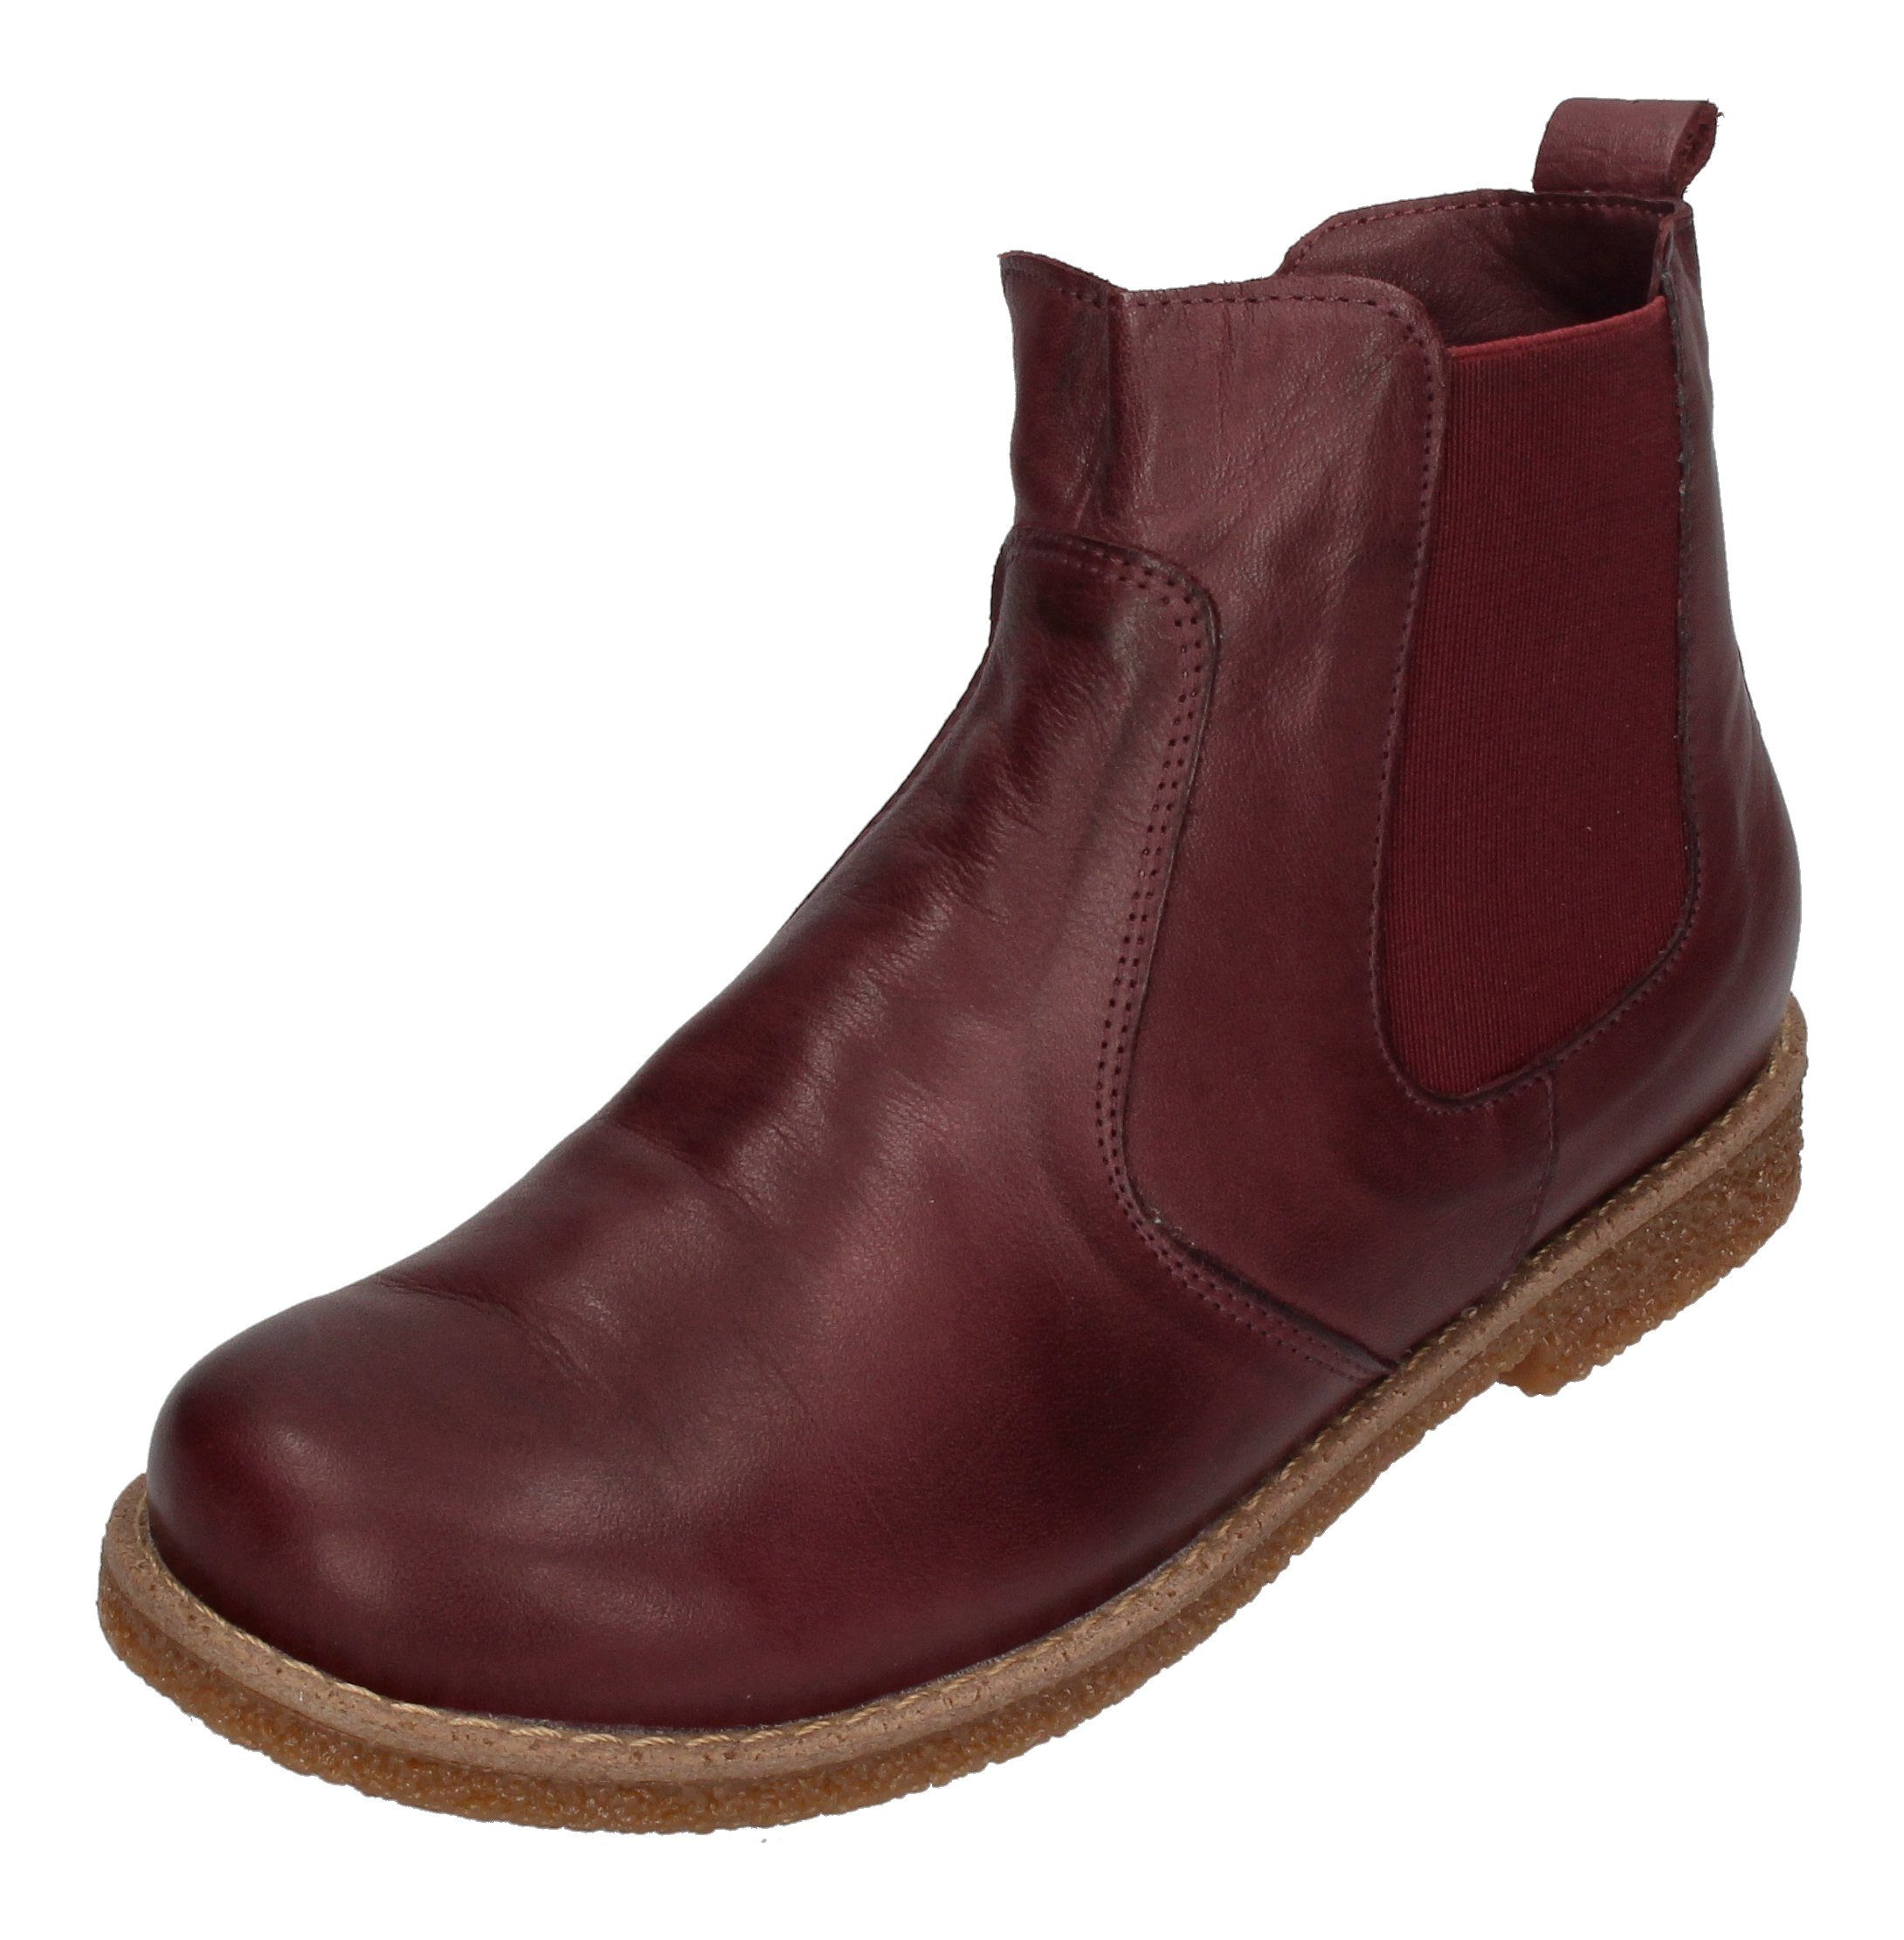 Andrea Conti 0340089 Chelseaboots Burgund